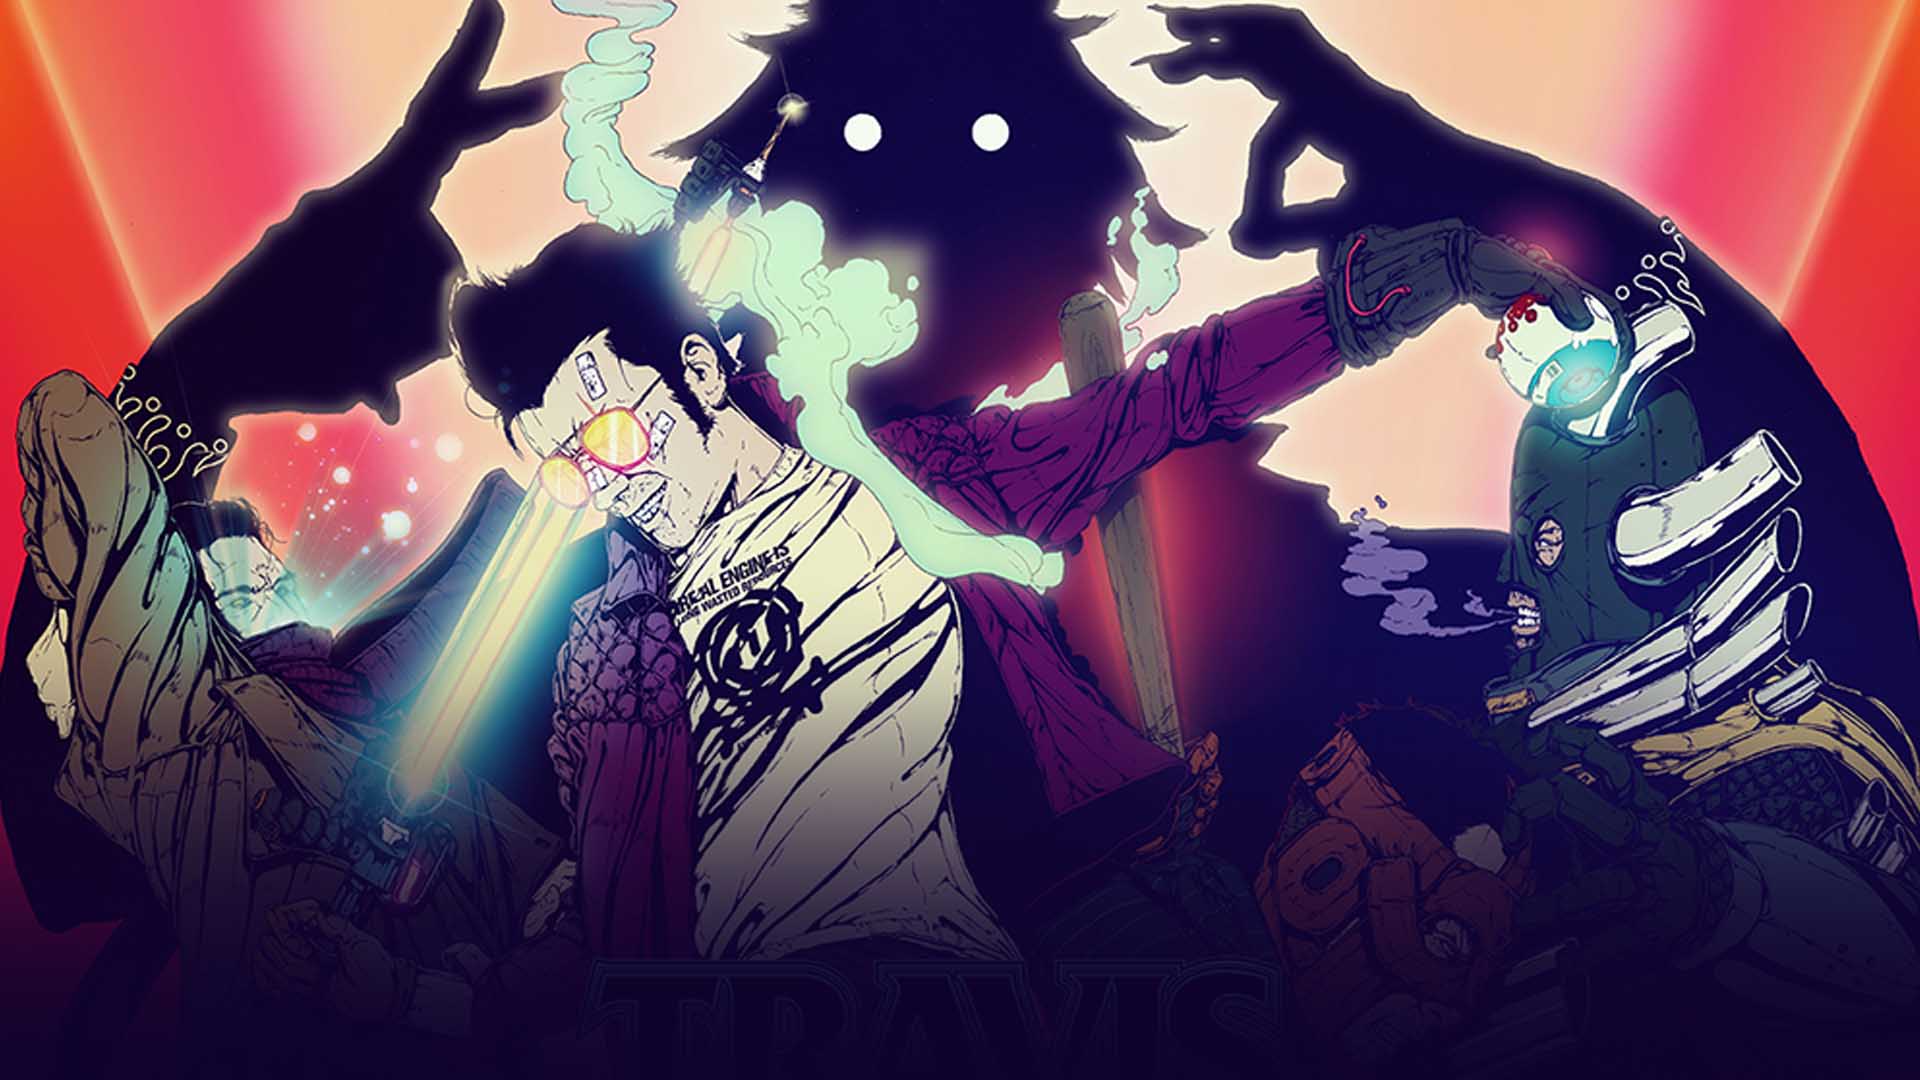 Next Update To Travis Strikes Again No More Heroes Include